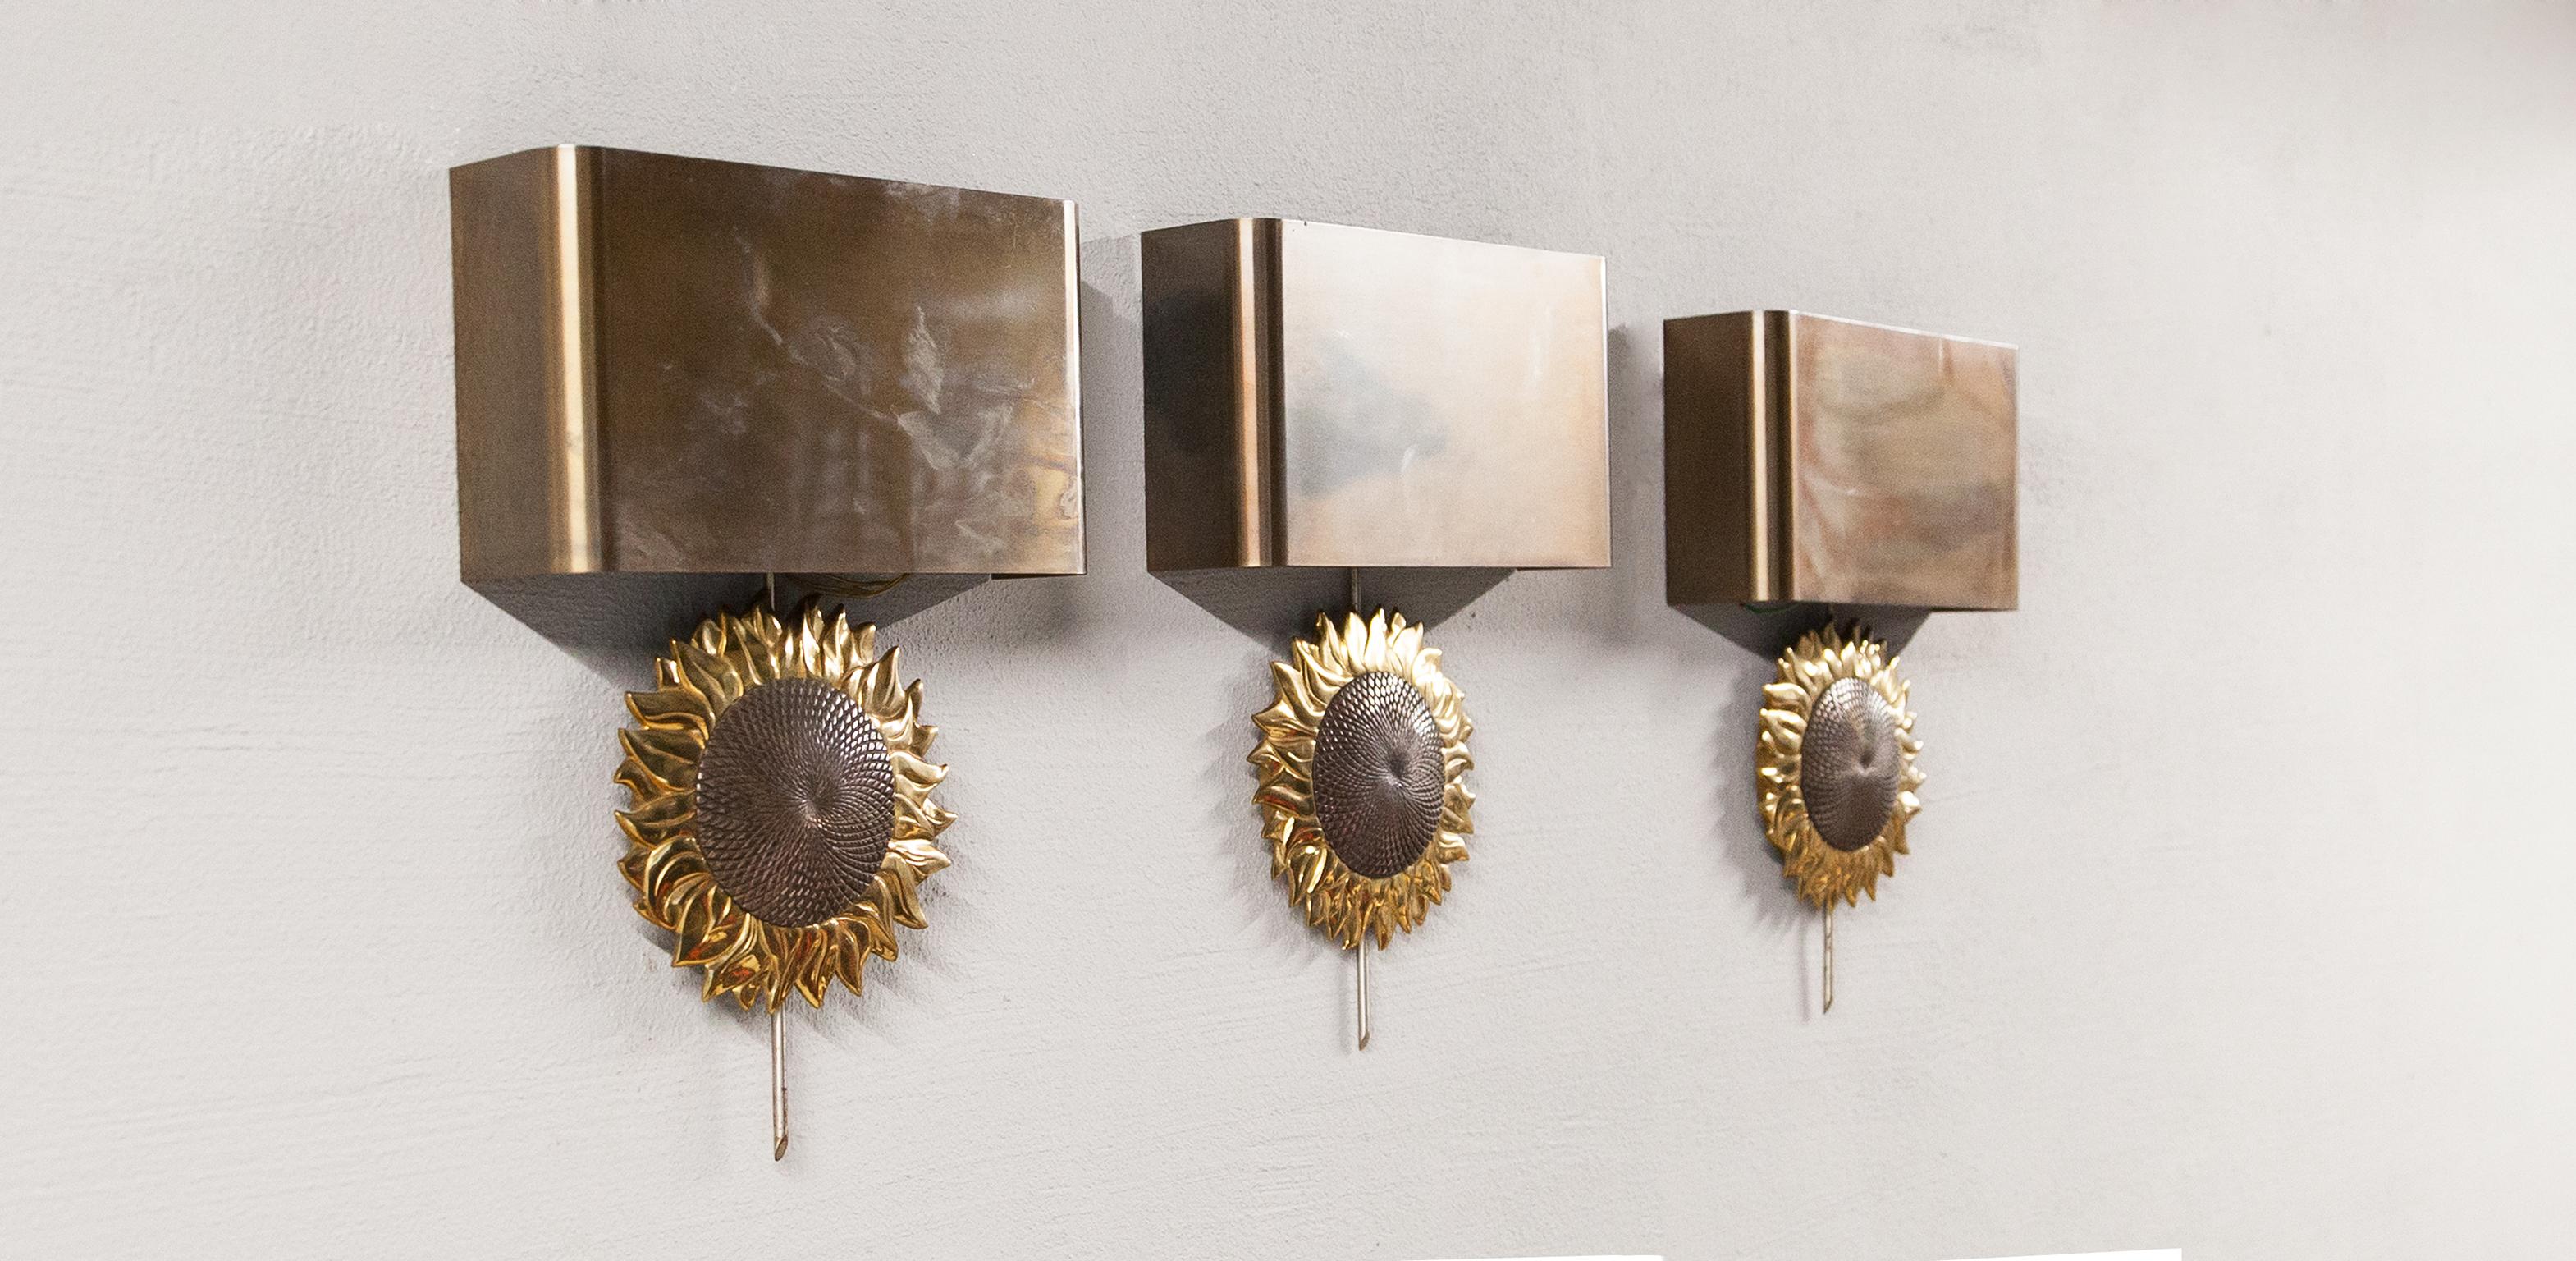 Set of three wall lights Sunflower designed by Maison Charles in 1970s.
Made in brass and bronze with two E14 sockets.
Signed “Charles made in France” inside the metal lampshade frame. In very good vintage condition, very minor scratches on the